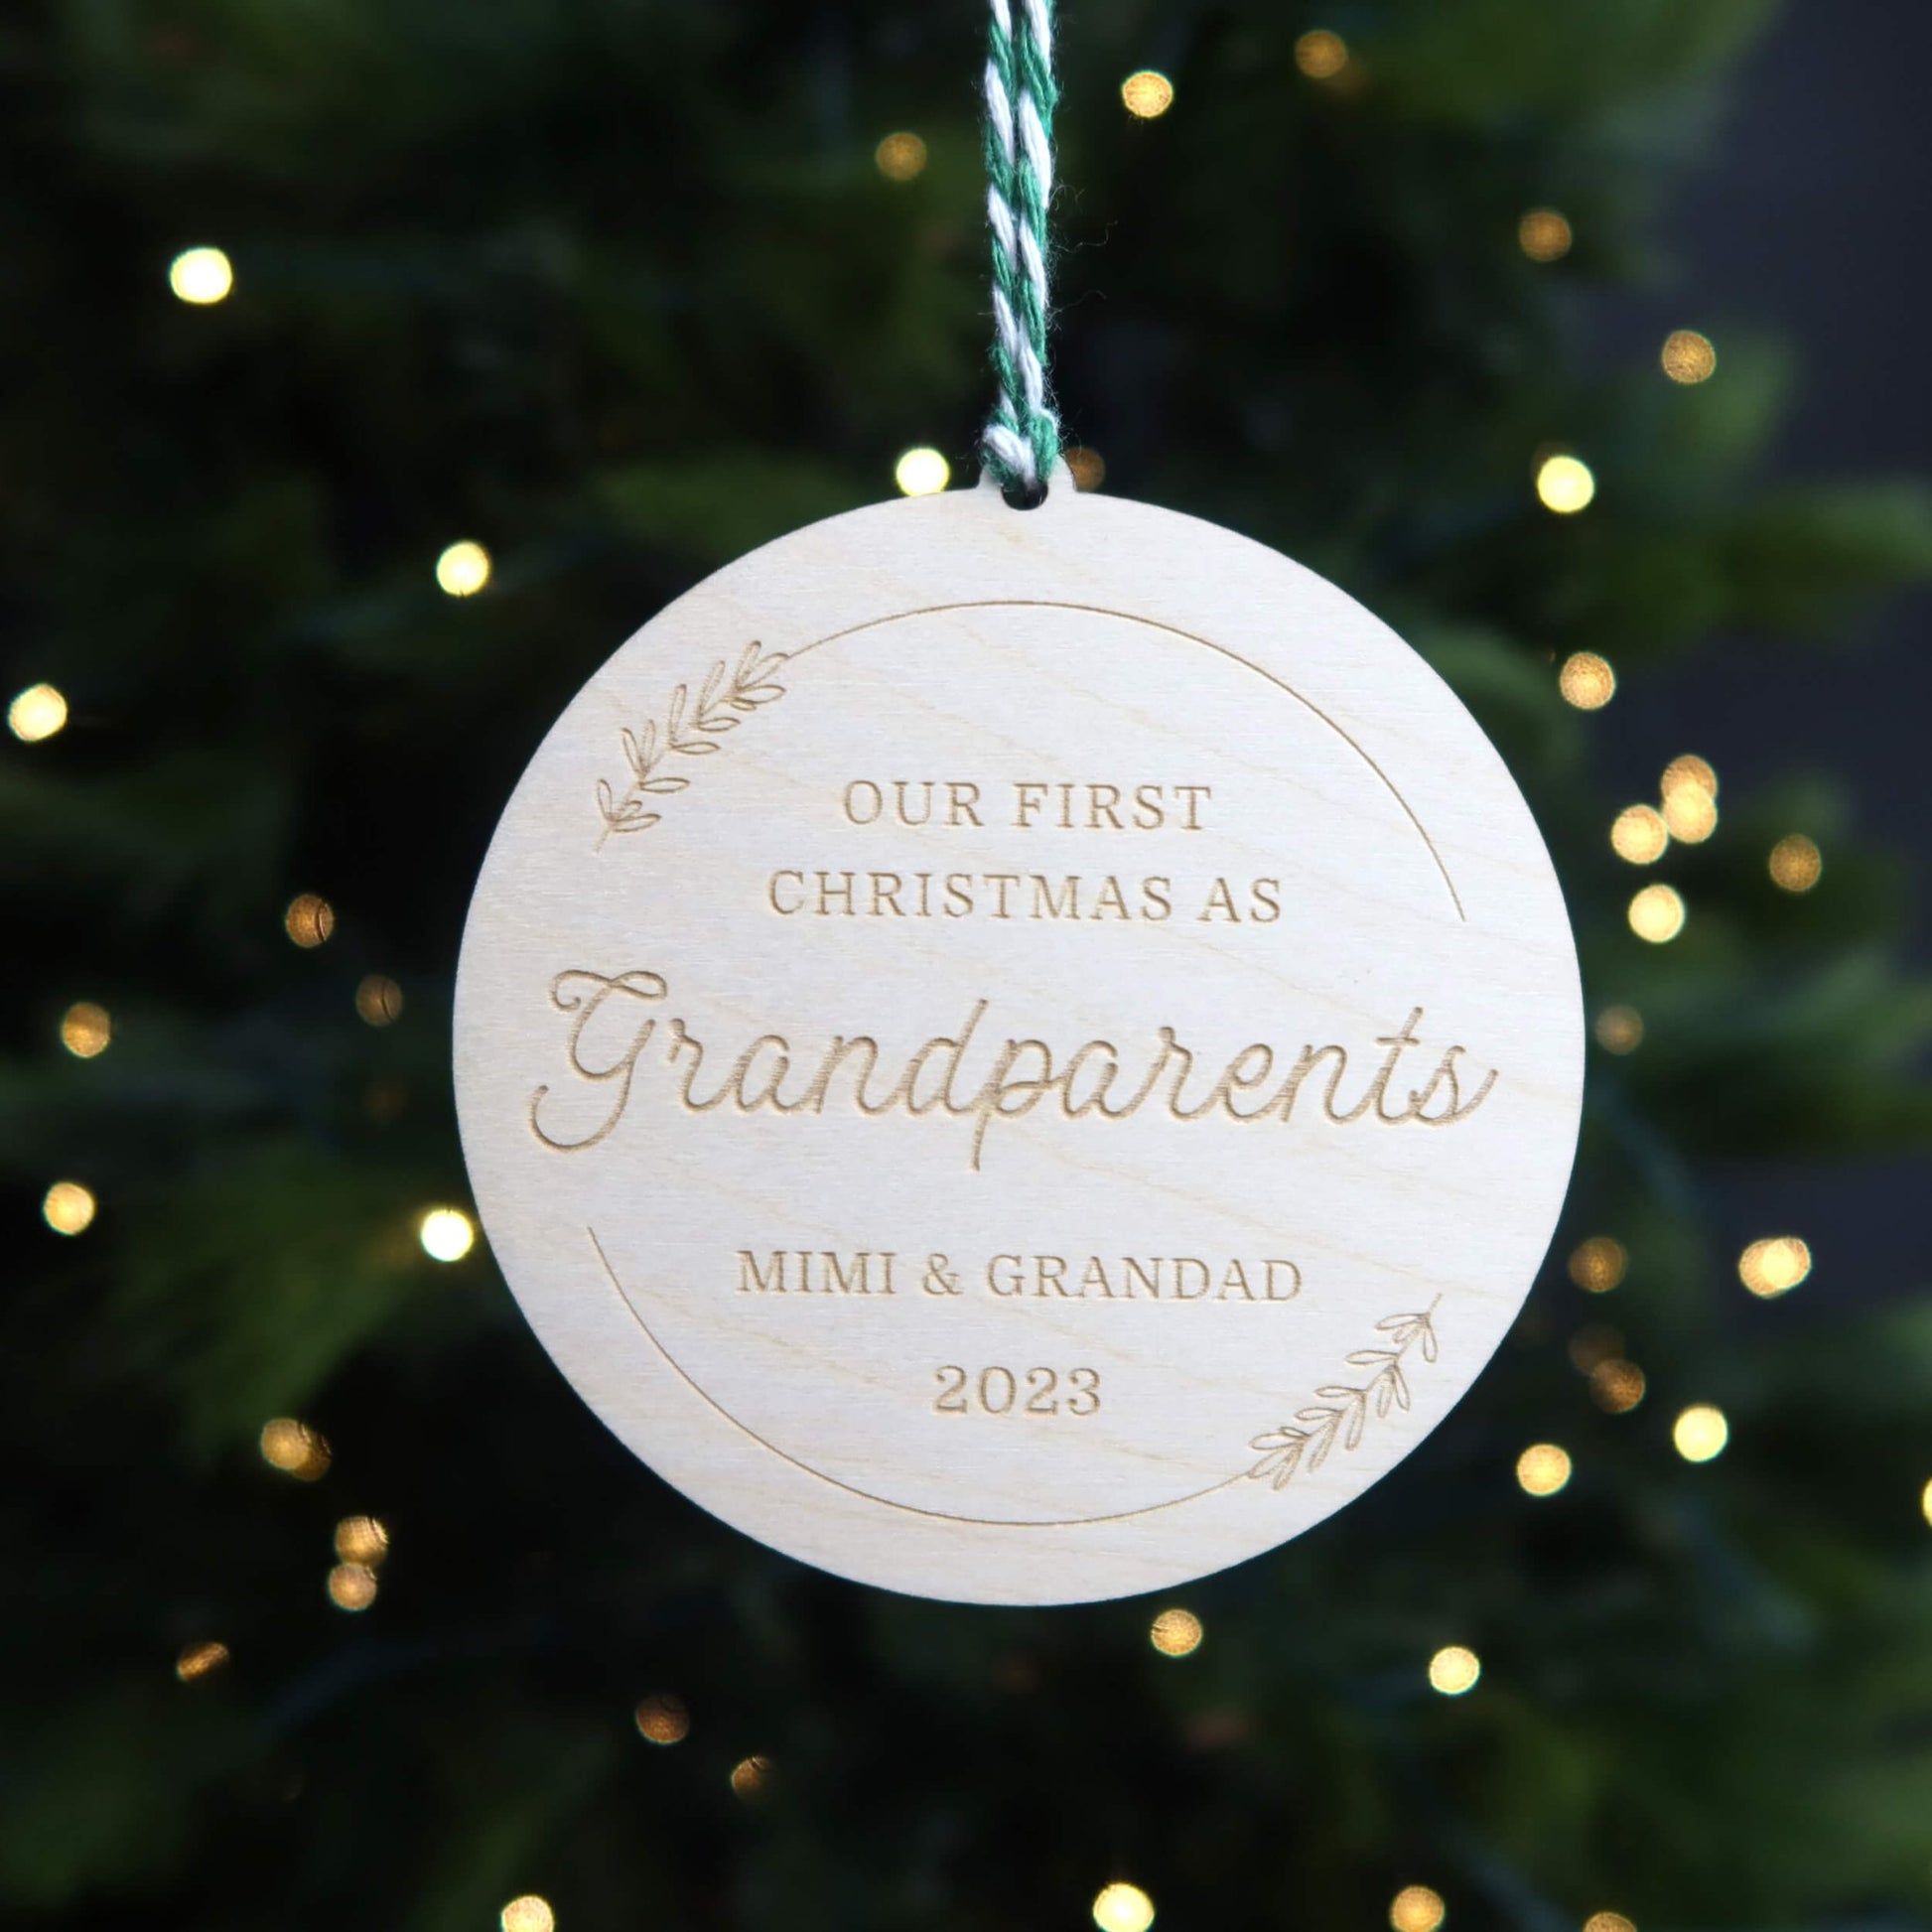 First Christmas as Grandparents Personalized Ornament - Holiday Ornaments - Moon Rock Prints